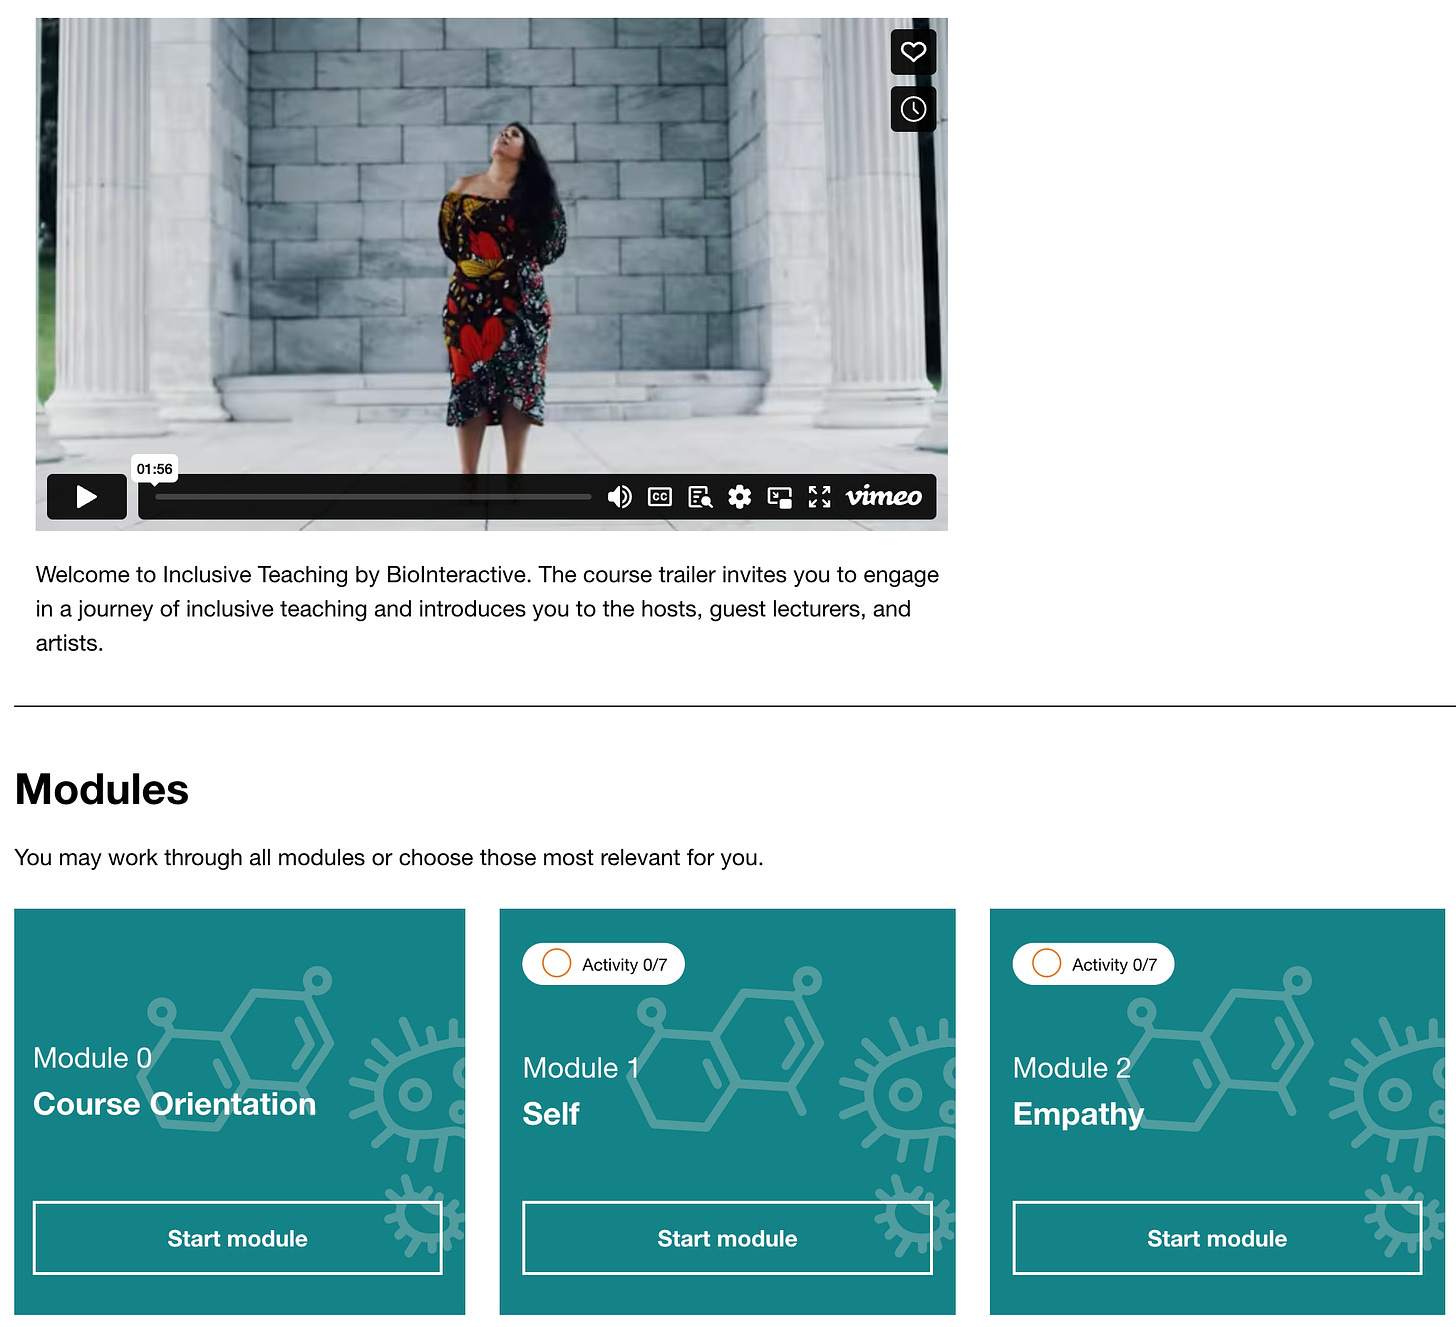 Screenshot of an online course. On top is a video featuring a Black woman in a vibrant dress before some stone pillars. Below are the interactive course modules (Course Orientation, Self, Empathy)